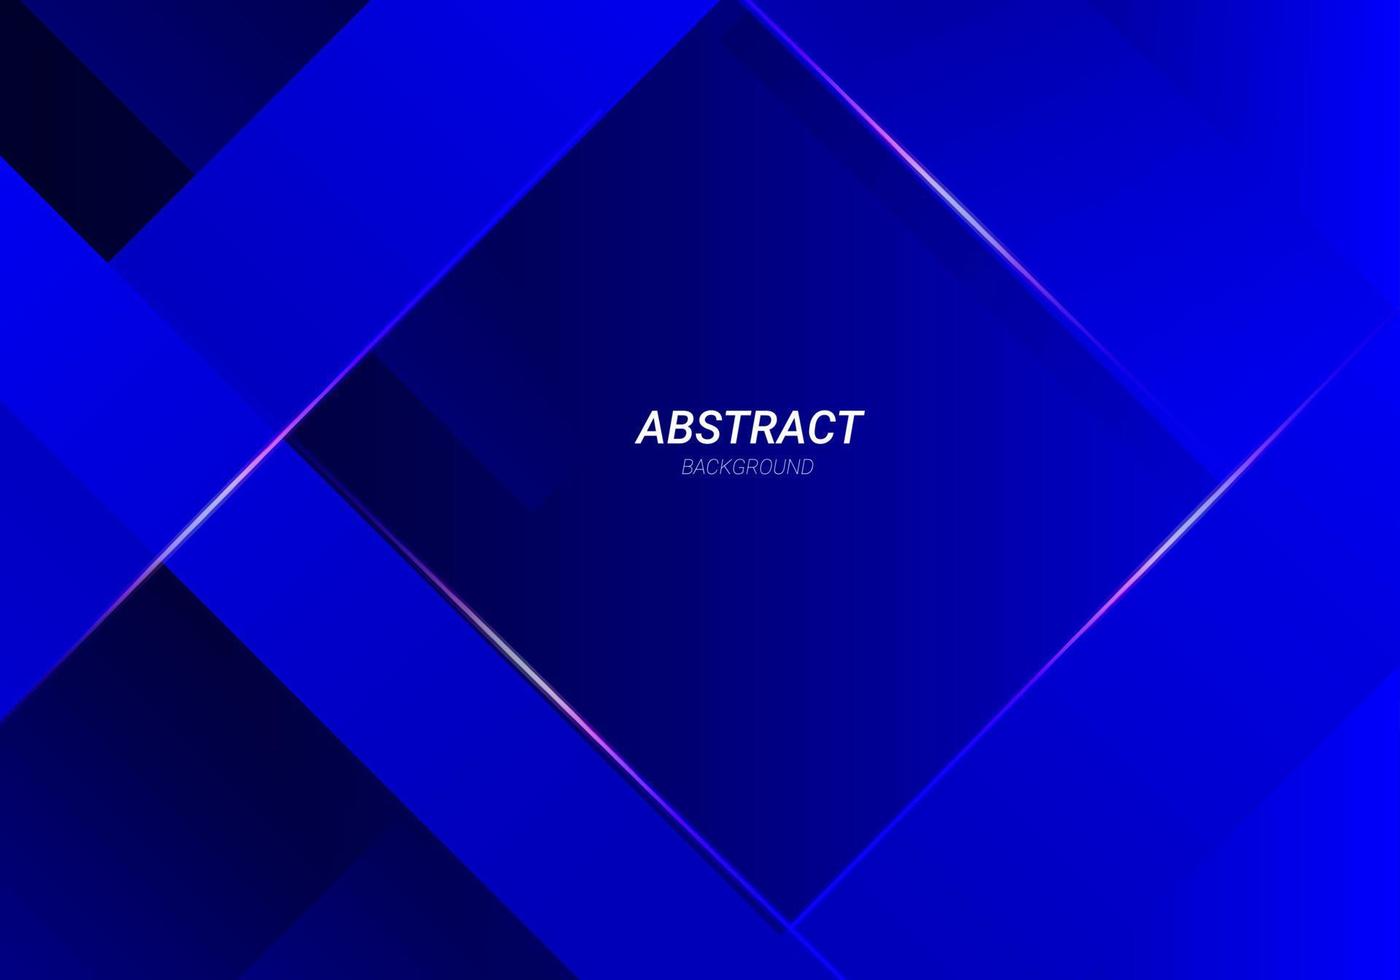 Abstract geometric elegant blue modern pattern colorful background vector